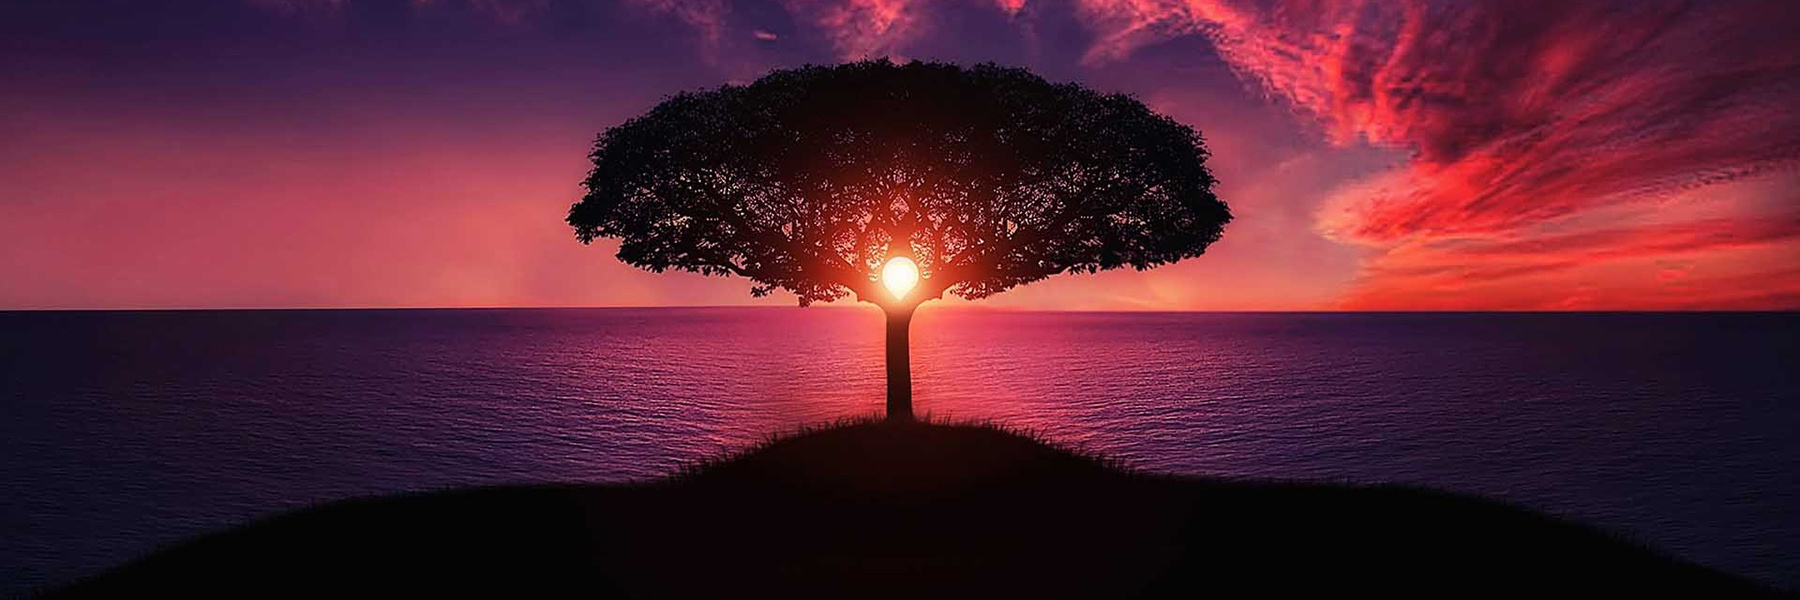 image shows a tree in front of an ocean